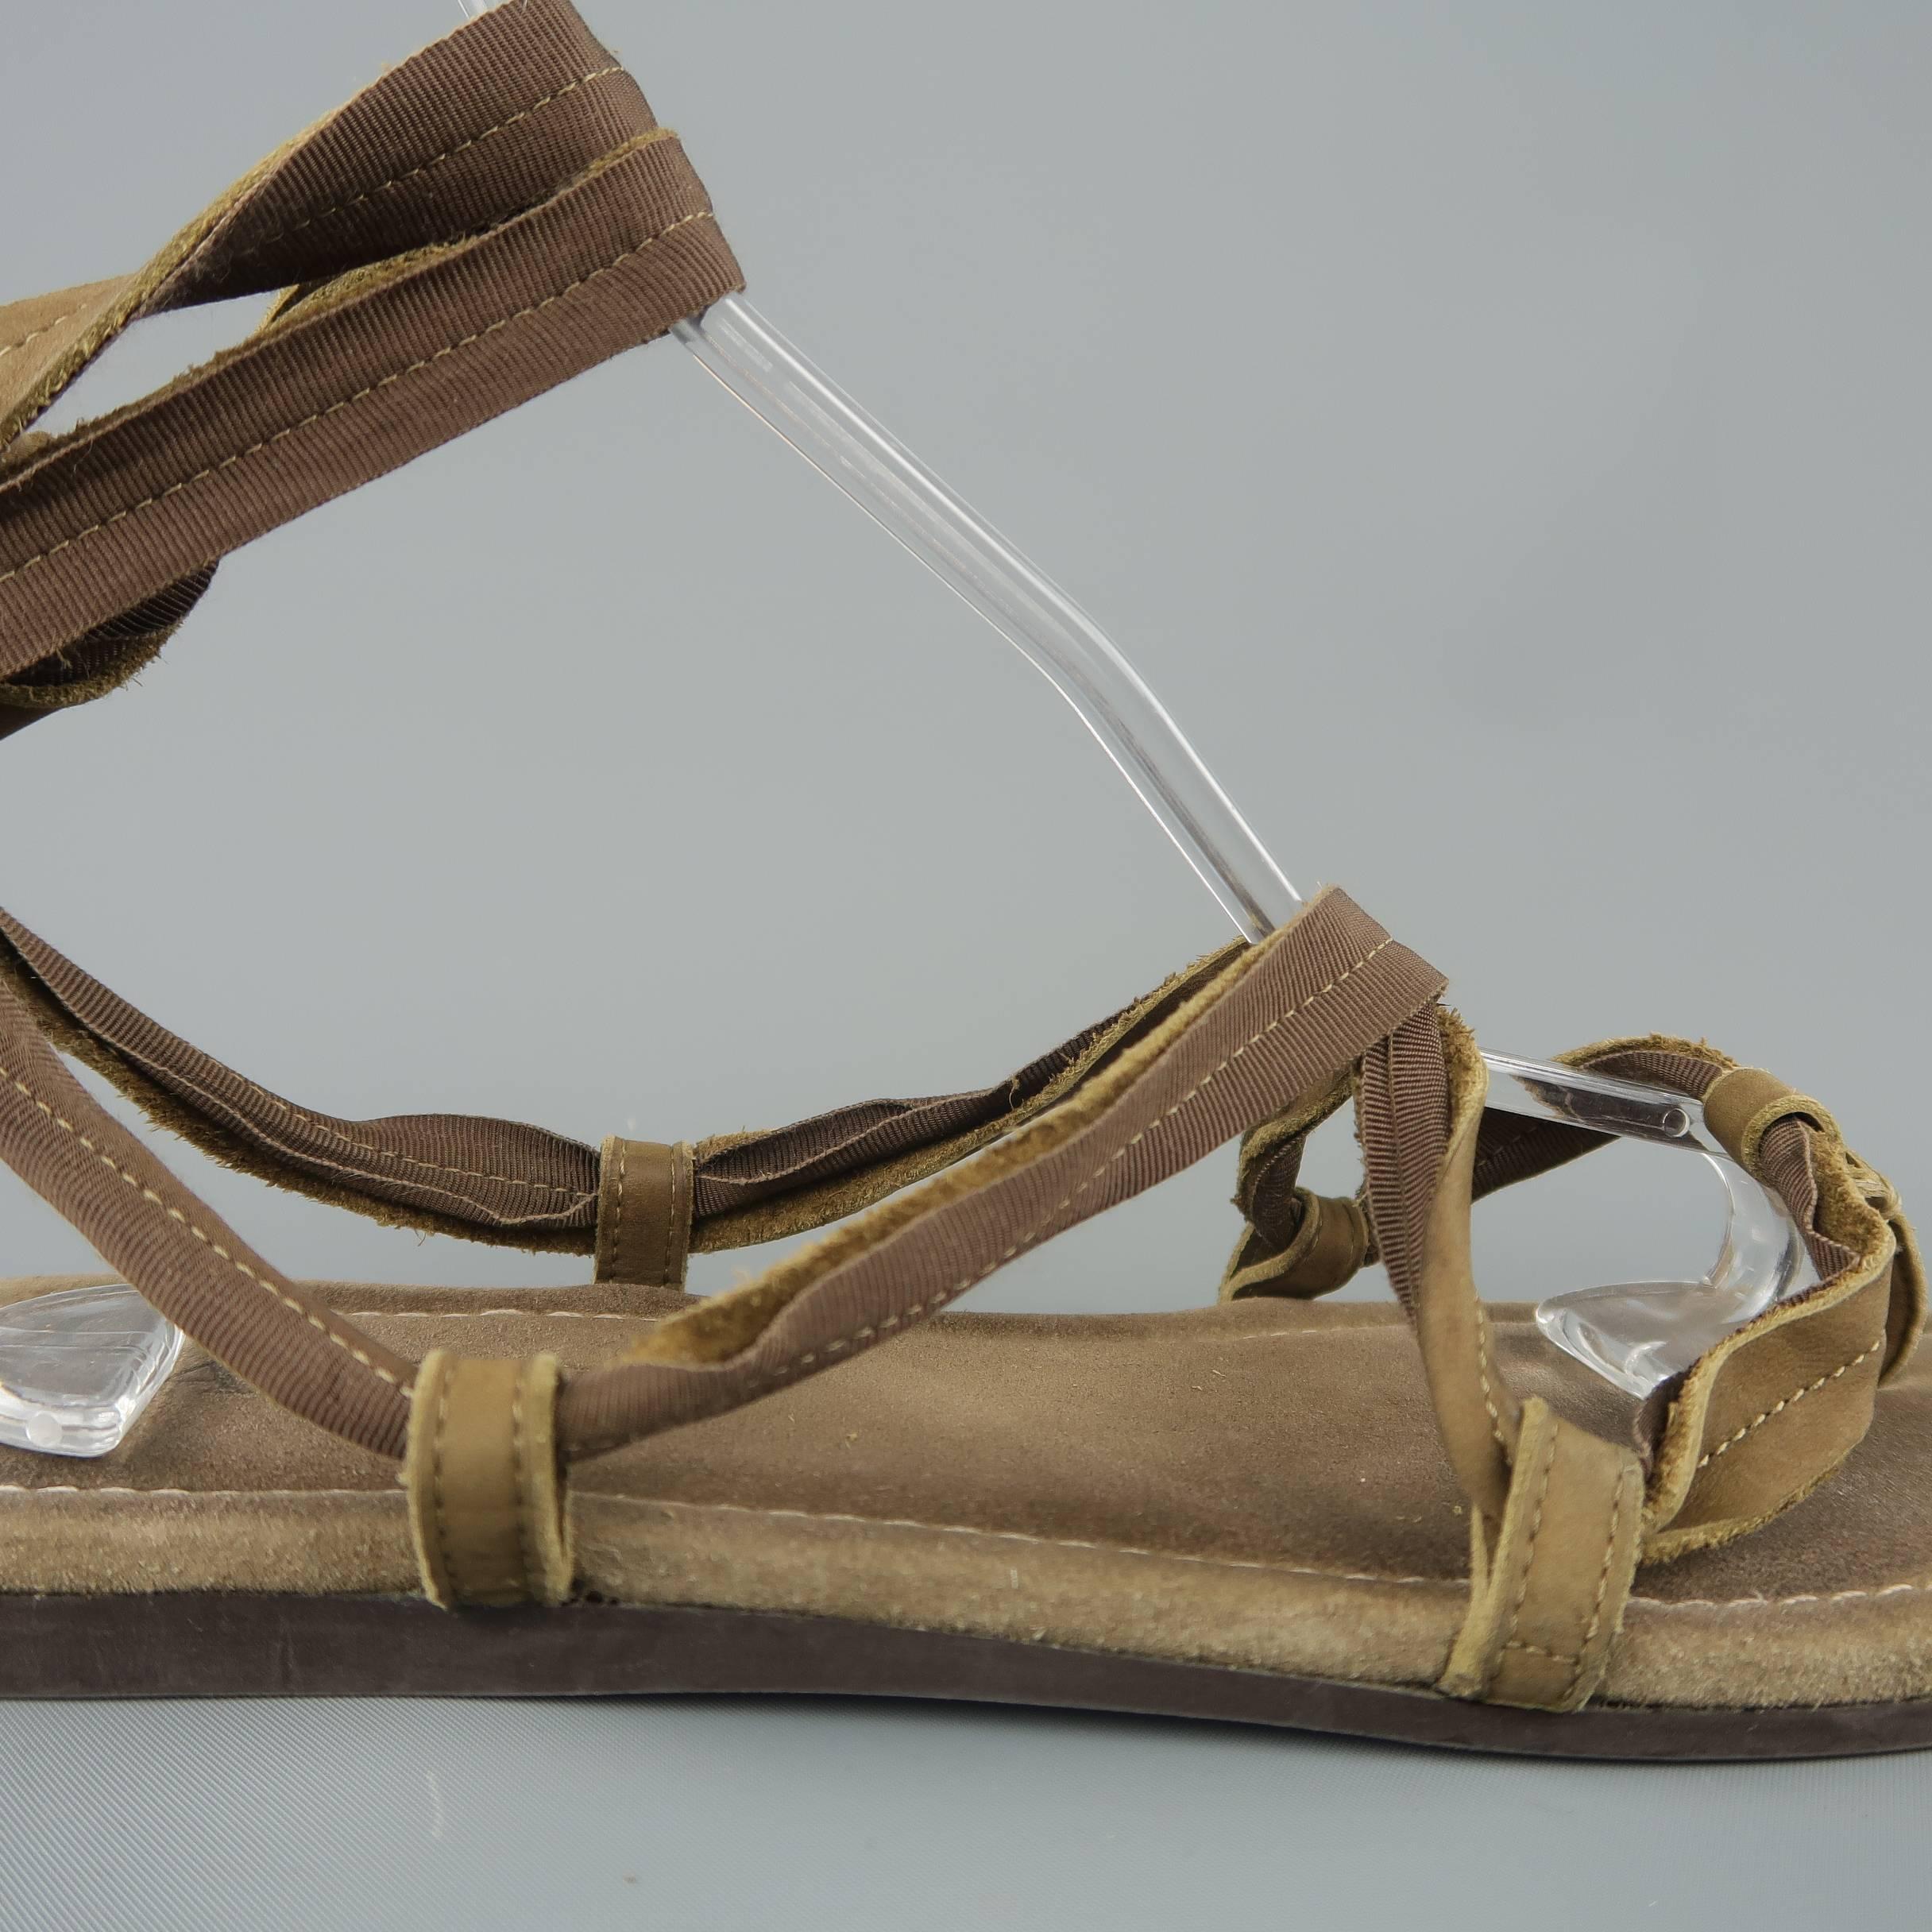 LANVIN gladiator sandals feature ribbon lined leather tied ankle straps on a suede sole. Wear throughout. As-is. Made in Italy.
 
Fair Pre-Owned Condition.
Marked: (no size)
 
Outsole: 11 x 4 in.
